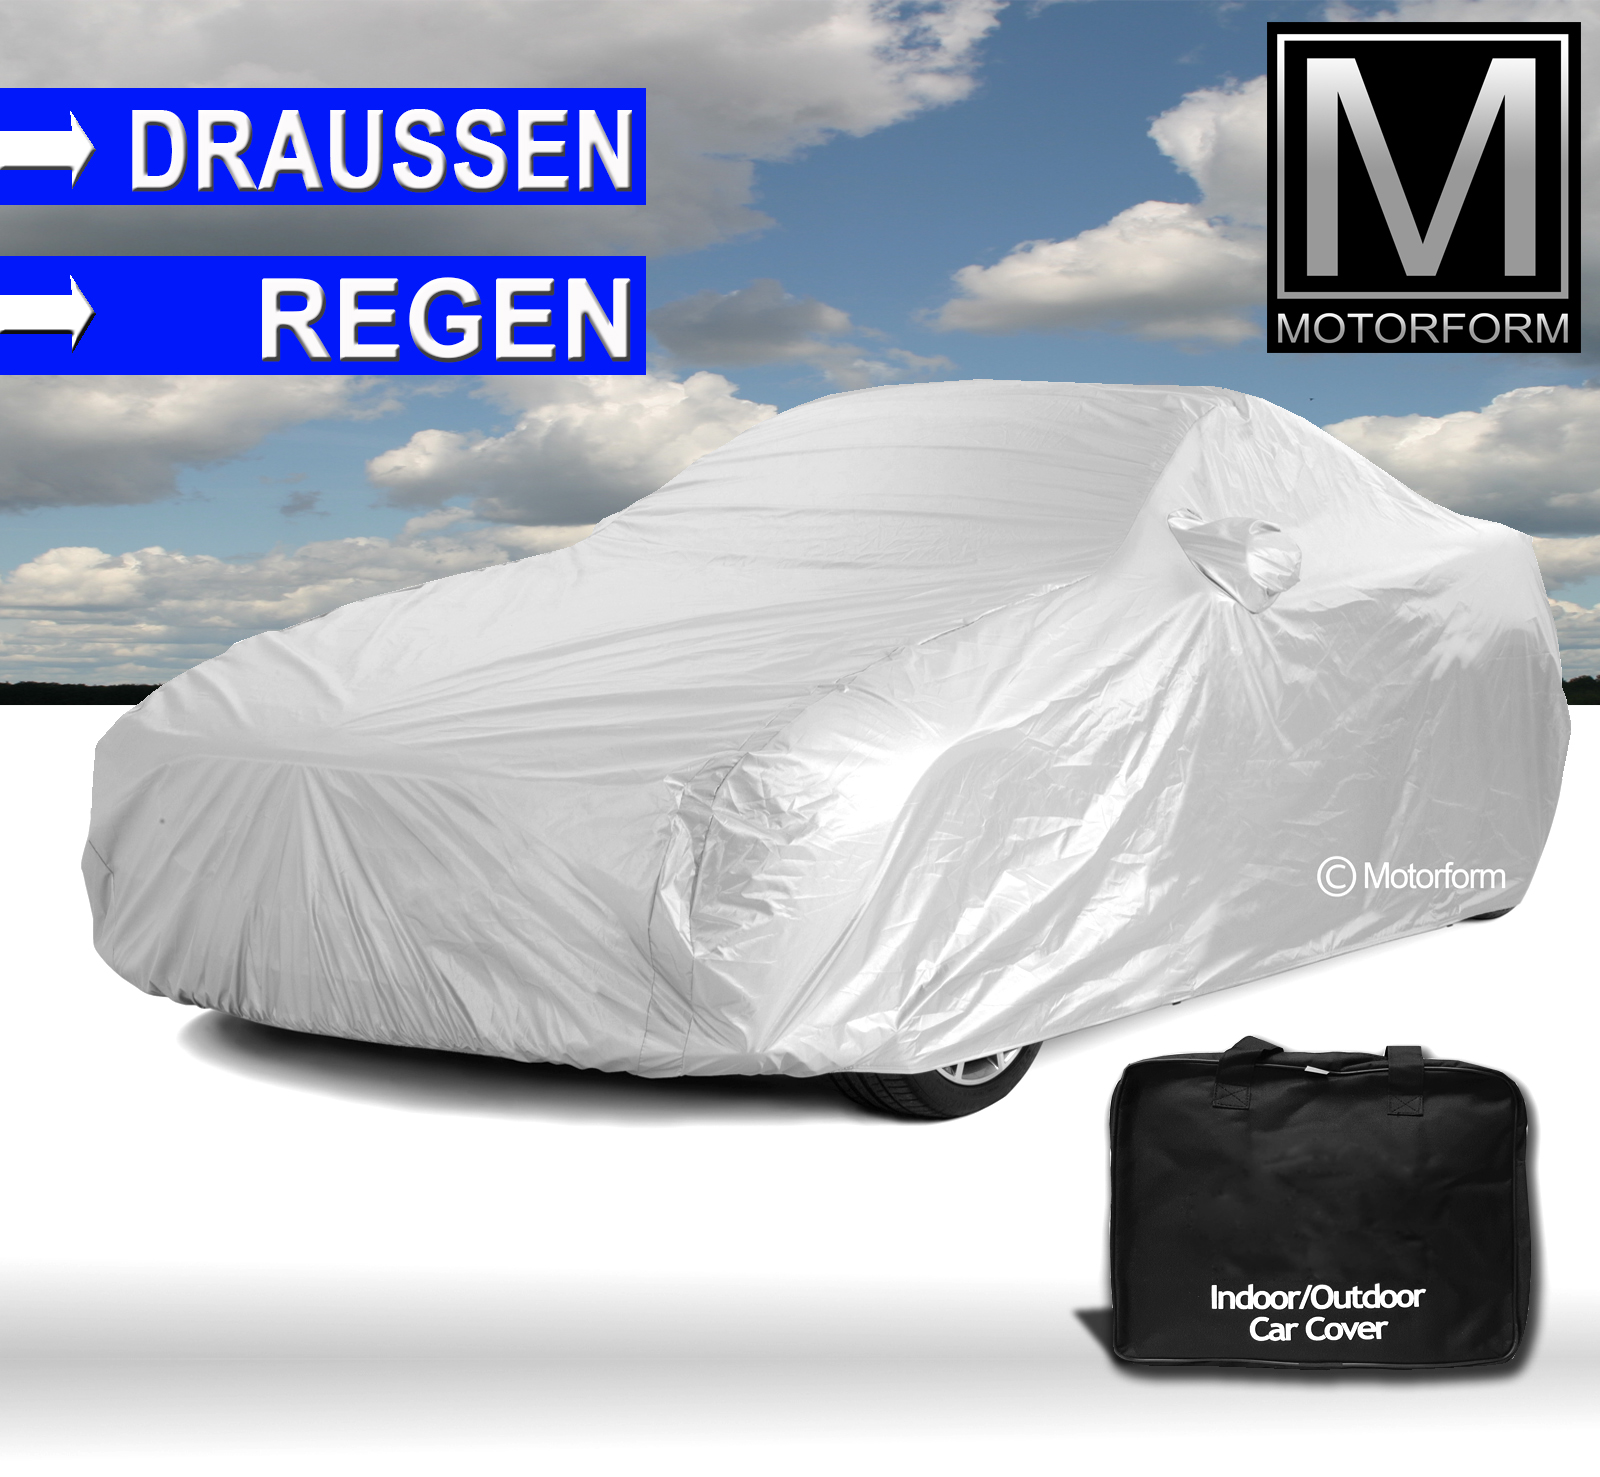 Voyager Outdoor Car Cover for Nissan Primera P10 (1990-97)